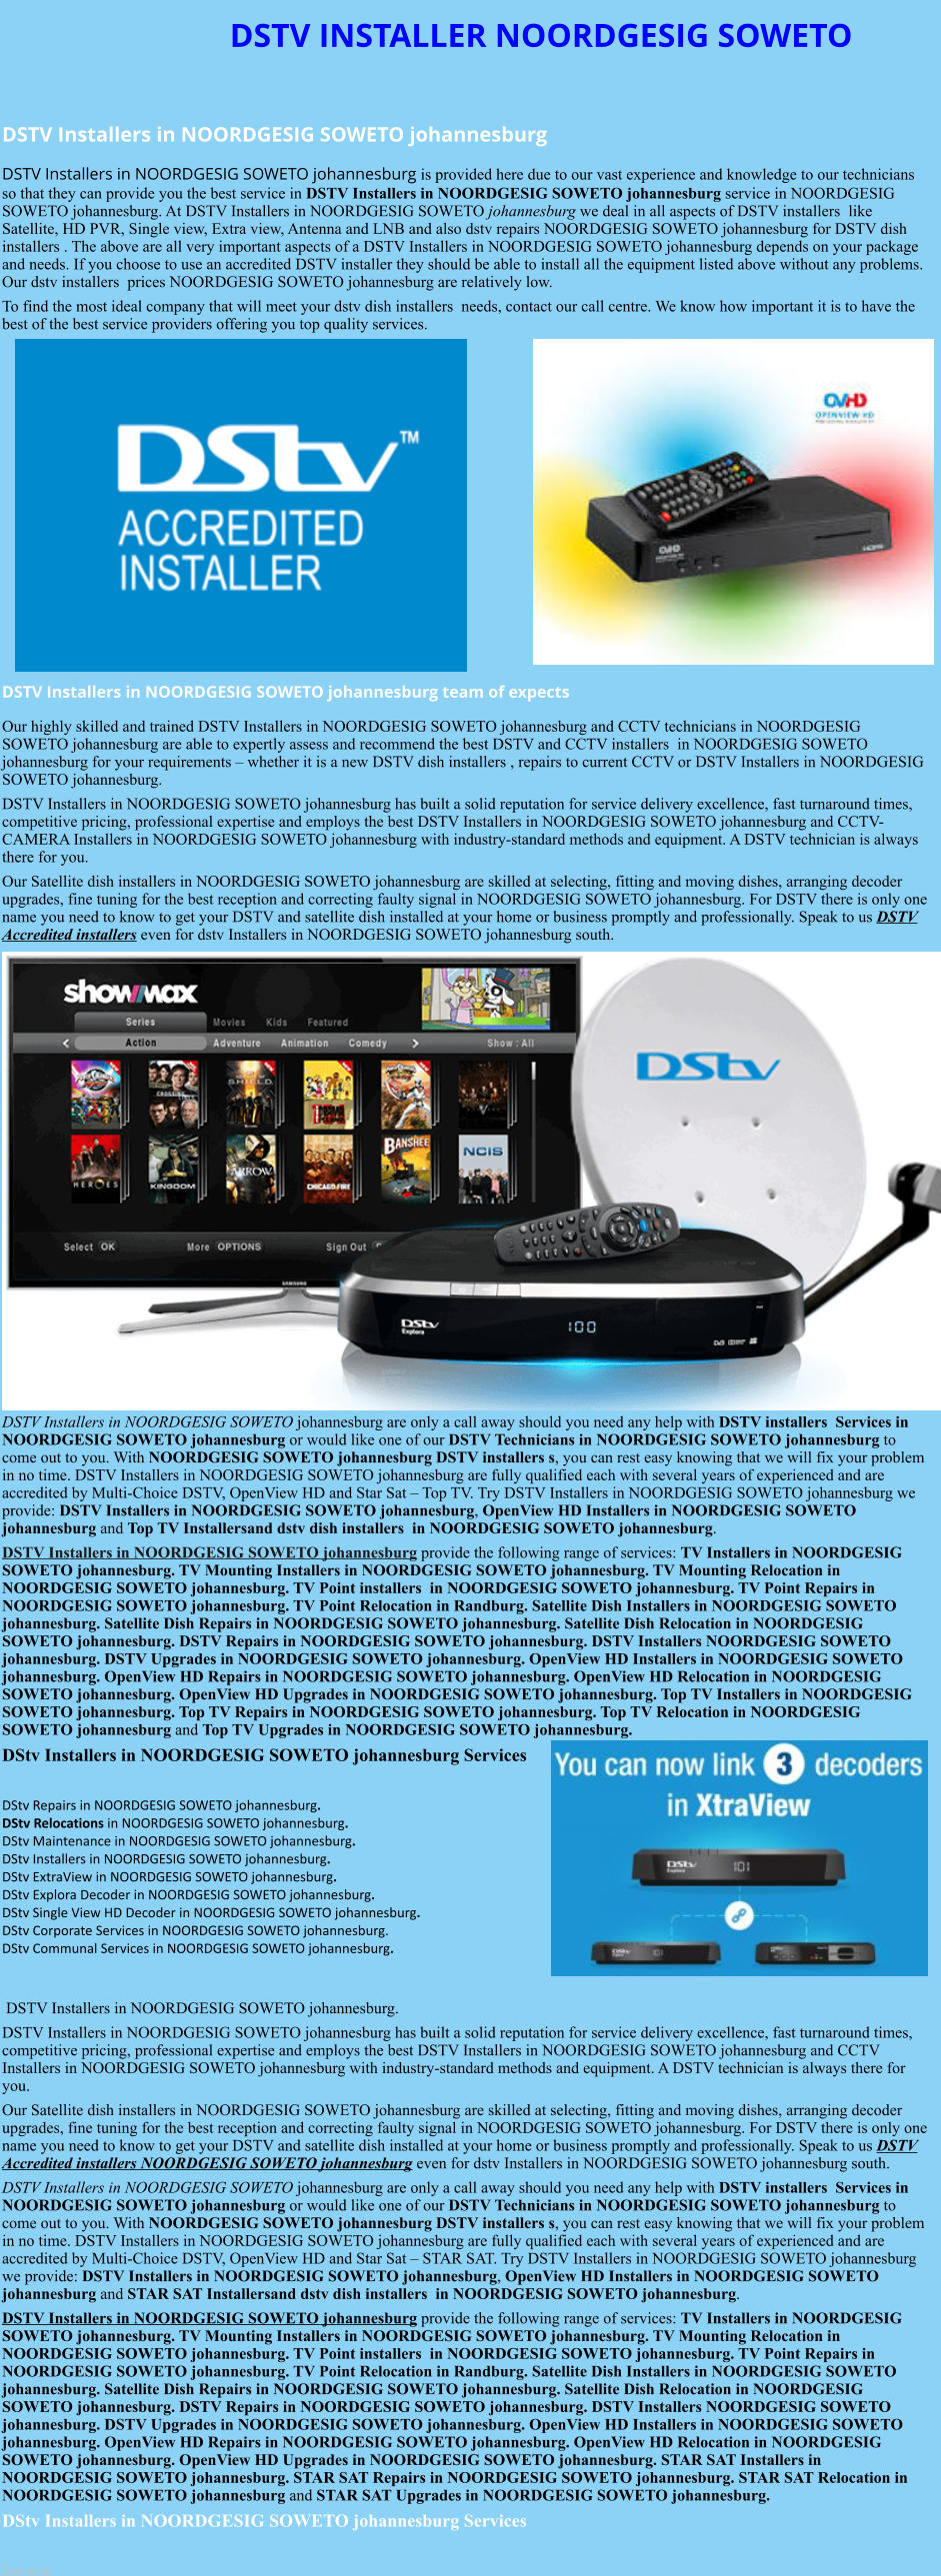 DSTV INSTALLER NOORDGESIG SOWETO  DSTV Installers in NOORDGESIG SOWETO johannesburg  DSTV Installers in NOORDGESIG SOWETO johannesburg is provided here due to our vast experience and knowledge to our technicians so that they can provide you the best service in DSTV Installers in NOORDGESIG SOWETO johannesburg service in NOORDGESIG SOWETO johannesburg. At DSTV Installers in NOORDGESIG SOWETO johannesburg we deal in all aspects of DSTV installers  like Satellite, HD PVR, Single view, Extra view, Antenna and LNB and also dstv repairs NOORDGESIG SOWETO johannesburg for DSTV dish installers . The above are all very important aspects of a DSTV Installers in NOORDGESIG SOWETO johannesburg depends on your package and needs. If you choose to use an accredited DSTV installer they should be able to install all the equipment listed above without any problems. Our dstv installers  prices NOORDGESIG SOWETO johannesburg are relatively low. To find the most ideal company that will meet your dstv dish installers  needs, contact our call centre. We know how important it is to have the best of the best service providers offering you top quality services.               DSTV Installers in NOORDGESIG SOWETO johannesburg team of expects Our highly skilled and trained DSTV Installers in NOORDGESIG SOWETO johannesburg and CCTV technicians in NOORDGESIG SOWETO johannesburg are able to expertly assess and recommend the best DSTV and CCTV installers  in NOORDGESIG SOWETO johannesburg for your requirements – whether it is a new DSTV dish installers , repairs to current CCTV or DSTV Installers in NOORDGESIG SOWETO johannesburg. DSTV Installers in NOORDGESIG SOWETO johannesburg has built a solid reputation for service delivery excellence, fast turnaround times, competitive pricing, professional expertise and employs the best DSTV Installers in NOORDGESIG SOWETO johannesburg and CCTV-CAMERA Installers in NOORDGESIG SOWETO johannesburg with industry-standard methods and equipment. A DSTV technician is always there for you. Our Satellite dish installers in NOORDGESIG SOWETO johannesburg are skilled at selecting, fitting and moving dishes, arranging decoder upgrades, fine tuning for the best reception and correcting faulty signal in NOORDGESIG SOWETO johannesburg. For DSTV there is only one name you need to know to get your DSTV and satellite dish installed at your home or business promptly and professionally. Speak to us DSTV Accredited installers even for dstv Installers in NOORDGESIG SOWETO johannesburg south.                    DSTV Installers in NOORDGESIG SOWETO johannesburg are only a call away should you need any help with DSTV installers  Services in NOORDGESIG SOWETO johannesburg or would like one of our DSTV Technicians in NOORDGESIG SOWETO johannesburg to come out to you. With NOORDGESIG SOWETO johannesburg DSTV installers s, you can rest easy knowing that we will fix your problem in no time. DSTV Installers in NOORDGESIG SOWETO johannesburg are fully qualified each with several years of experienced and are accredited by Multi-Choice DSTV, OpenView HD and Star Sat – Top TV. Try DSTV Installers in NOORDGESIG SOWETO johannesburg we provide: DSTV Installers in NOORDGESIG SOWETO johannesburg, OpenView HD Installers in NOORDGESIG SOWETO johannesburg and Top TV Installersand dstv dish installers  in NOORDGESIG SOWETO johannesburg. DSTV Installers in NOORDGESIG SOWETO johannesburg provide the following range of services: TV Installers in NOORDGESIG SOWETO johannesburg. TV Mounting Installers in NOORDGESIG SOWETO johannesburg. TV Mounting Relocation in NOORDGESIG SOWETO johannesburg. TV Point installers  in NOORDGESIG SOWETO johannesburg. TV Point Repairs in NOORDGESIG SOWETO johannesburg. TV Point Relocation in Randburg. Satellite Dish Installers in NOORDGESIG SOWETO johannesburg. Satellite Dish Repairs in NOORDGESIG SOWETO johannesburg. Satellite Dish Relocation in NOORDGESIG SOWETO johannesburg. DSTV Repairs in NOORDGESIG SOWETO johannesburg. DSTV Installers NOORDGESIG SOWETO johannesburg. DSTV Upgrades in NOORDGESIG SOWETO johannesburg. OpenView HD Installers in NOORDGESIG SOWETO johannesburg. OpenView HD Repairs in NOORDGESIG SOWETO johannesburg. OpenView HD Relocation in NOORDGESIG SOWETO johannesburg. OpenView HD Upgrades in NOORDGESIG SOWETO johannesburg. Top TV Installers in NOORDGESIG SOWETO johannesburg. Top TV Repairs in NOORDGESIG SOWETO johannesburg. Top TV Relocation in NOORDGESIG SOWETO johannesburg and Top TV Upgrades in NOORDGESIG SOWETO johannesburg. DStv Installers in NOORDGESIG SOWETO johannesburg Services  DStv Repairs in NOORDGESIG SOWETO johannesburg.  DStv Relocations in NOORDGESIG SOWETO johannesburg.  DStv Maintenance in NOORDGESIG SOWETO johannesburg. DStv Installers in NOORDGESIG SOWETO johannesburg. DStv ExtraView in NOORDGESIG SOWETO johannesburg. DStv Explora Decoder in NOORDGESIG SOWETO johannesburg. DStv Single View HD Decoder in NOORDGESIG SOWETO johannesburg. DStv Corporate Services in NOORDGESIG SOWETO johannesburg. DStv Communal Services in NOORDGESIG SOWETO johannesburg.    DSTV Installers in NOORDGESIG SOWETO johannesburg. DSTV Installers in NOORDGESIG SOWETO johannesburg has built a solid reputation for service delivery excellence, fast turnaround times, competitive pricing, professional expertise and employs the best DSTV Installers in NOORDGESIG SOWETO johannesburg and CCTV Installers in NOORDGESIG SOWETO johannesburg with industry-standard methods and equipment. A DSTV technician is always there for you. Our Satellite dish installers in NOORDGESIG SOWETO johannesburg are skilled at selecting, fitting and moving dishes, arranging decoder upgrades, fine tuning for the best reception and correcting faulty signal in NOORDGESIG SOWETO johannesburg. For DSTV there is only one name you need to know to get your DSTV and satellite dish installed at your home or business promptly and professionally. Speak to us DSTV Accredited installers NOORDGESIG SOWETO johannesburg even for dstv Installers in NOORDGESIG SOWETO johannesburg south. DSTV Installers in NOORDGESIG SOWETO johannesburg are only a call away should you need any help with DSTV installers  Services in NOORDGESIG SOWETO johannesburg or would like one of our DSTV Technicians in NOORDGESIG SOWETO johannesburg to come out to you. With NOORDGESIG SOWETO johannesburg DSTV installers s, you can rest easy knowing that we will fix your problem in no time. DSTV Installers in NOORDGESIG SOWETO johannesburg are fully qualified each with several years of experienced and are accredited by Multi-Choice DSTV, OpenView HD and Star Sat – STAR SAT. Try DSTV Installers in NOORDGESIG SOWETO johannesburg we provide: DSTV Installers in NOORDGESIG SOWETO johannesburg, OpenView HD Installers in NOORDGESIG SOWETO johannesburg and STAR SAT Installersand dstv dish installers  in NOORDGESIG SOWETO johannesburg. DSTV Installers in NOORDGESIG SOWETO johannesburg provide the following range of services: TV Installers in NOORDGESIG SOWETO johannesburg. TV Mounting Installers in NOORDGESIG SOWETO johannesburg. TV Mounting Relocation in NOORDGESIG SOWETO johannesburg. TV Point installers  in NOORDGESIG SOWETO johannesburg. TV Point Repairs in NOORDGESIG SOWETO johannesburg. TV Point Relocation in Randburg. Satellite Dish Installers in NOORDGESIG SOWETO johannesburg. Satellite Dish Repairs in NOORDGESIG SOWETO johannesburg. Satellite Dish Relocation in NOORDGESIG SOWETO johannesburg. DSTV Repairs in NOORDGESIG SOWETO johannesburg. DSTV Installers NOORDGESIG SOWETO johannesburg. DSTV Upgrades in NOORDGESIG SOWETO johannesburg. OpenView HD Installers in NOORDGESIG SOWETO johannesburg. OpenView HD Repairs in NOORDGESIG SOWETO johannesburg. OpenView HD Relocation in NOORDGESIG SOWETO johannesburg. OpenView HD Upgrades in NOORDGESIG SOWETO johannesburg. STAR SAT Installers in NOORDGESIG SOWETO johannesburg. STAR SAT Repairs in NOORDGESIG SOWETO johannesburg. STAR SAT Relocation in NOORDGESIG SOWETO johannesburg and STAR SAT Upgrades in NOORDGESIG SOWETO johannesburg. DStv Installers in NOORDGESIG SOWETO johannesburg Services  See also